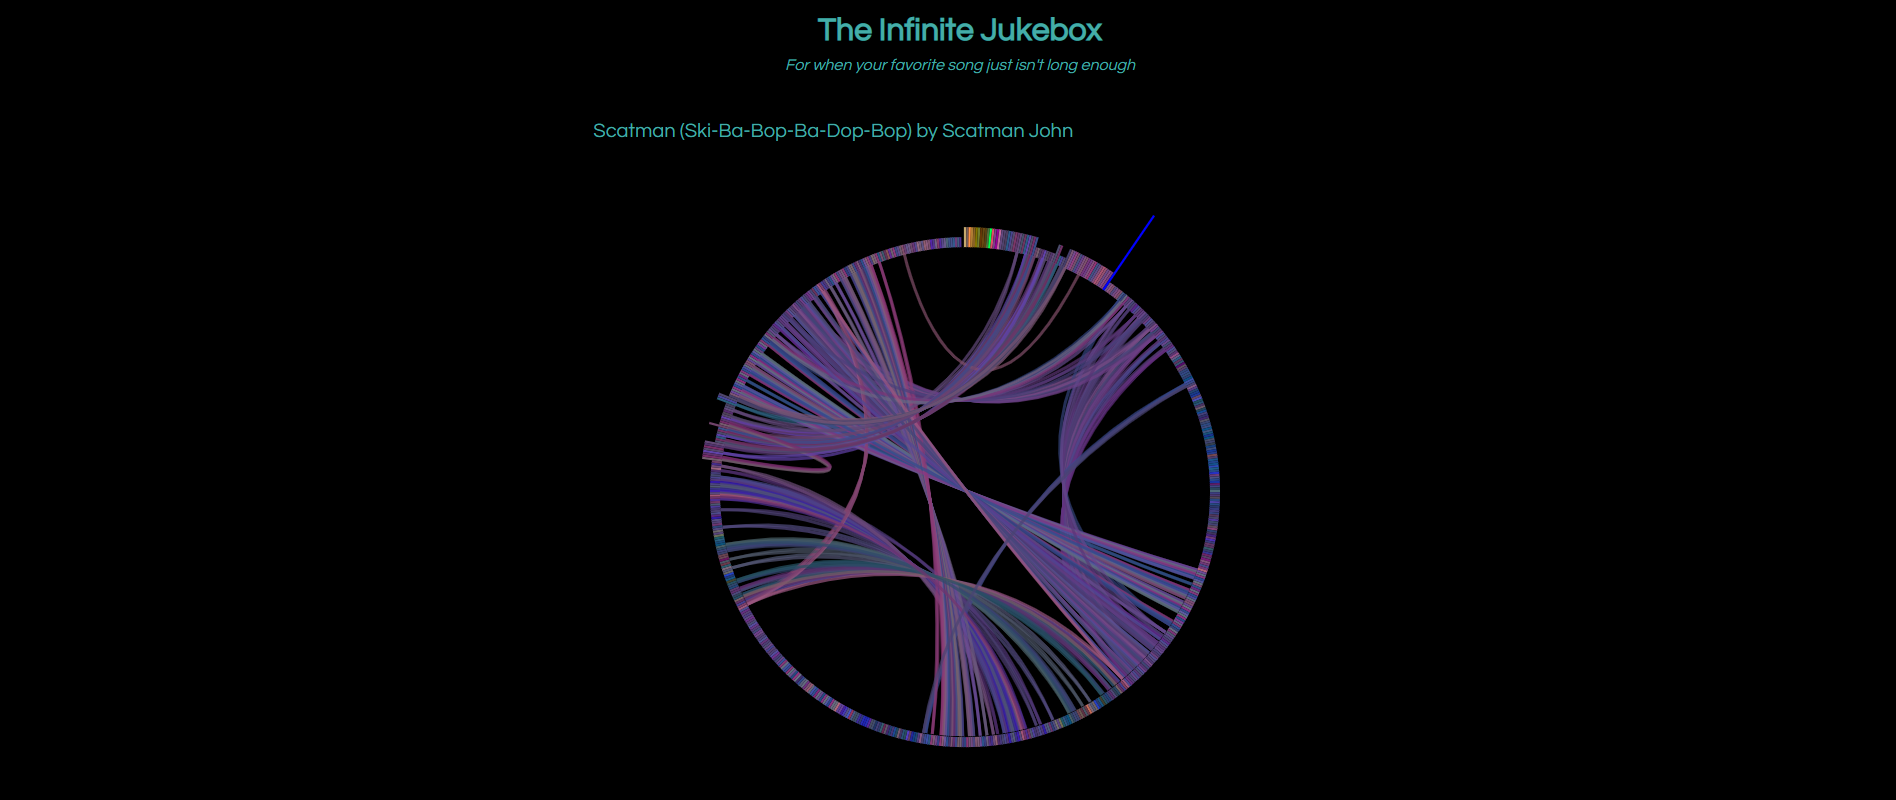 Make your favourite songs last forever with The Infinite Jukebox